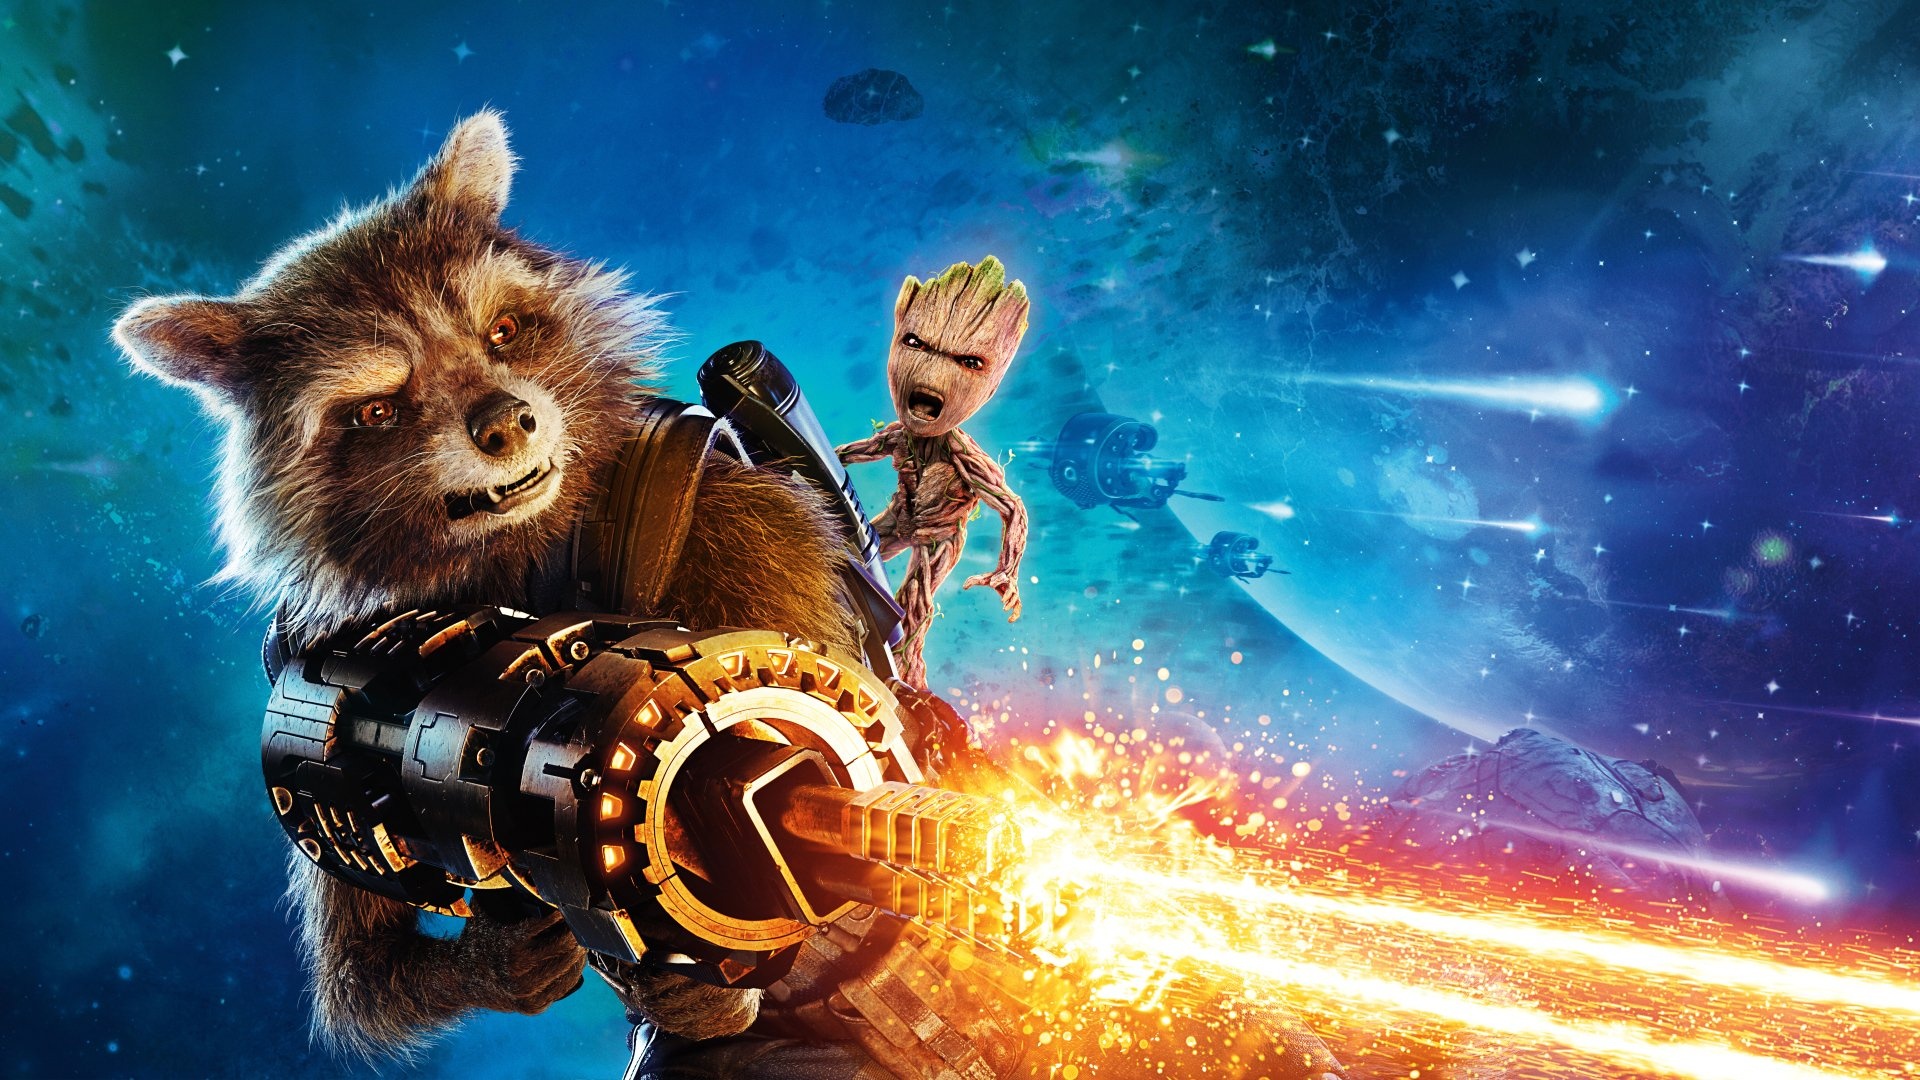 Guardians of the Galaxy, HD wallpapers, Background images, 1920x1080 Full HD Desktop